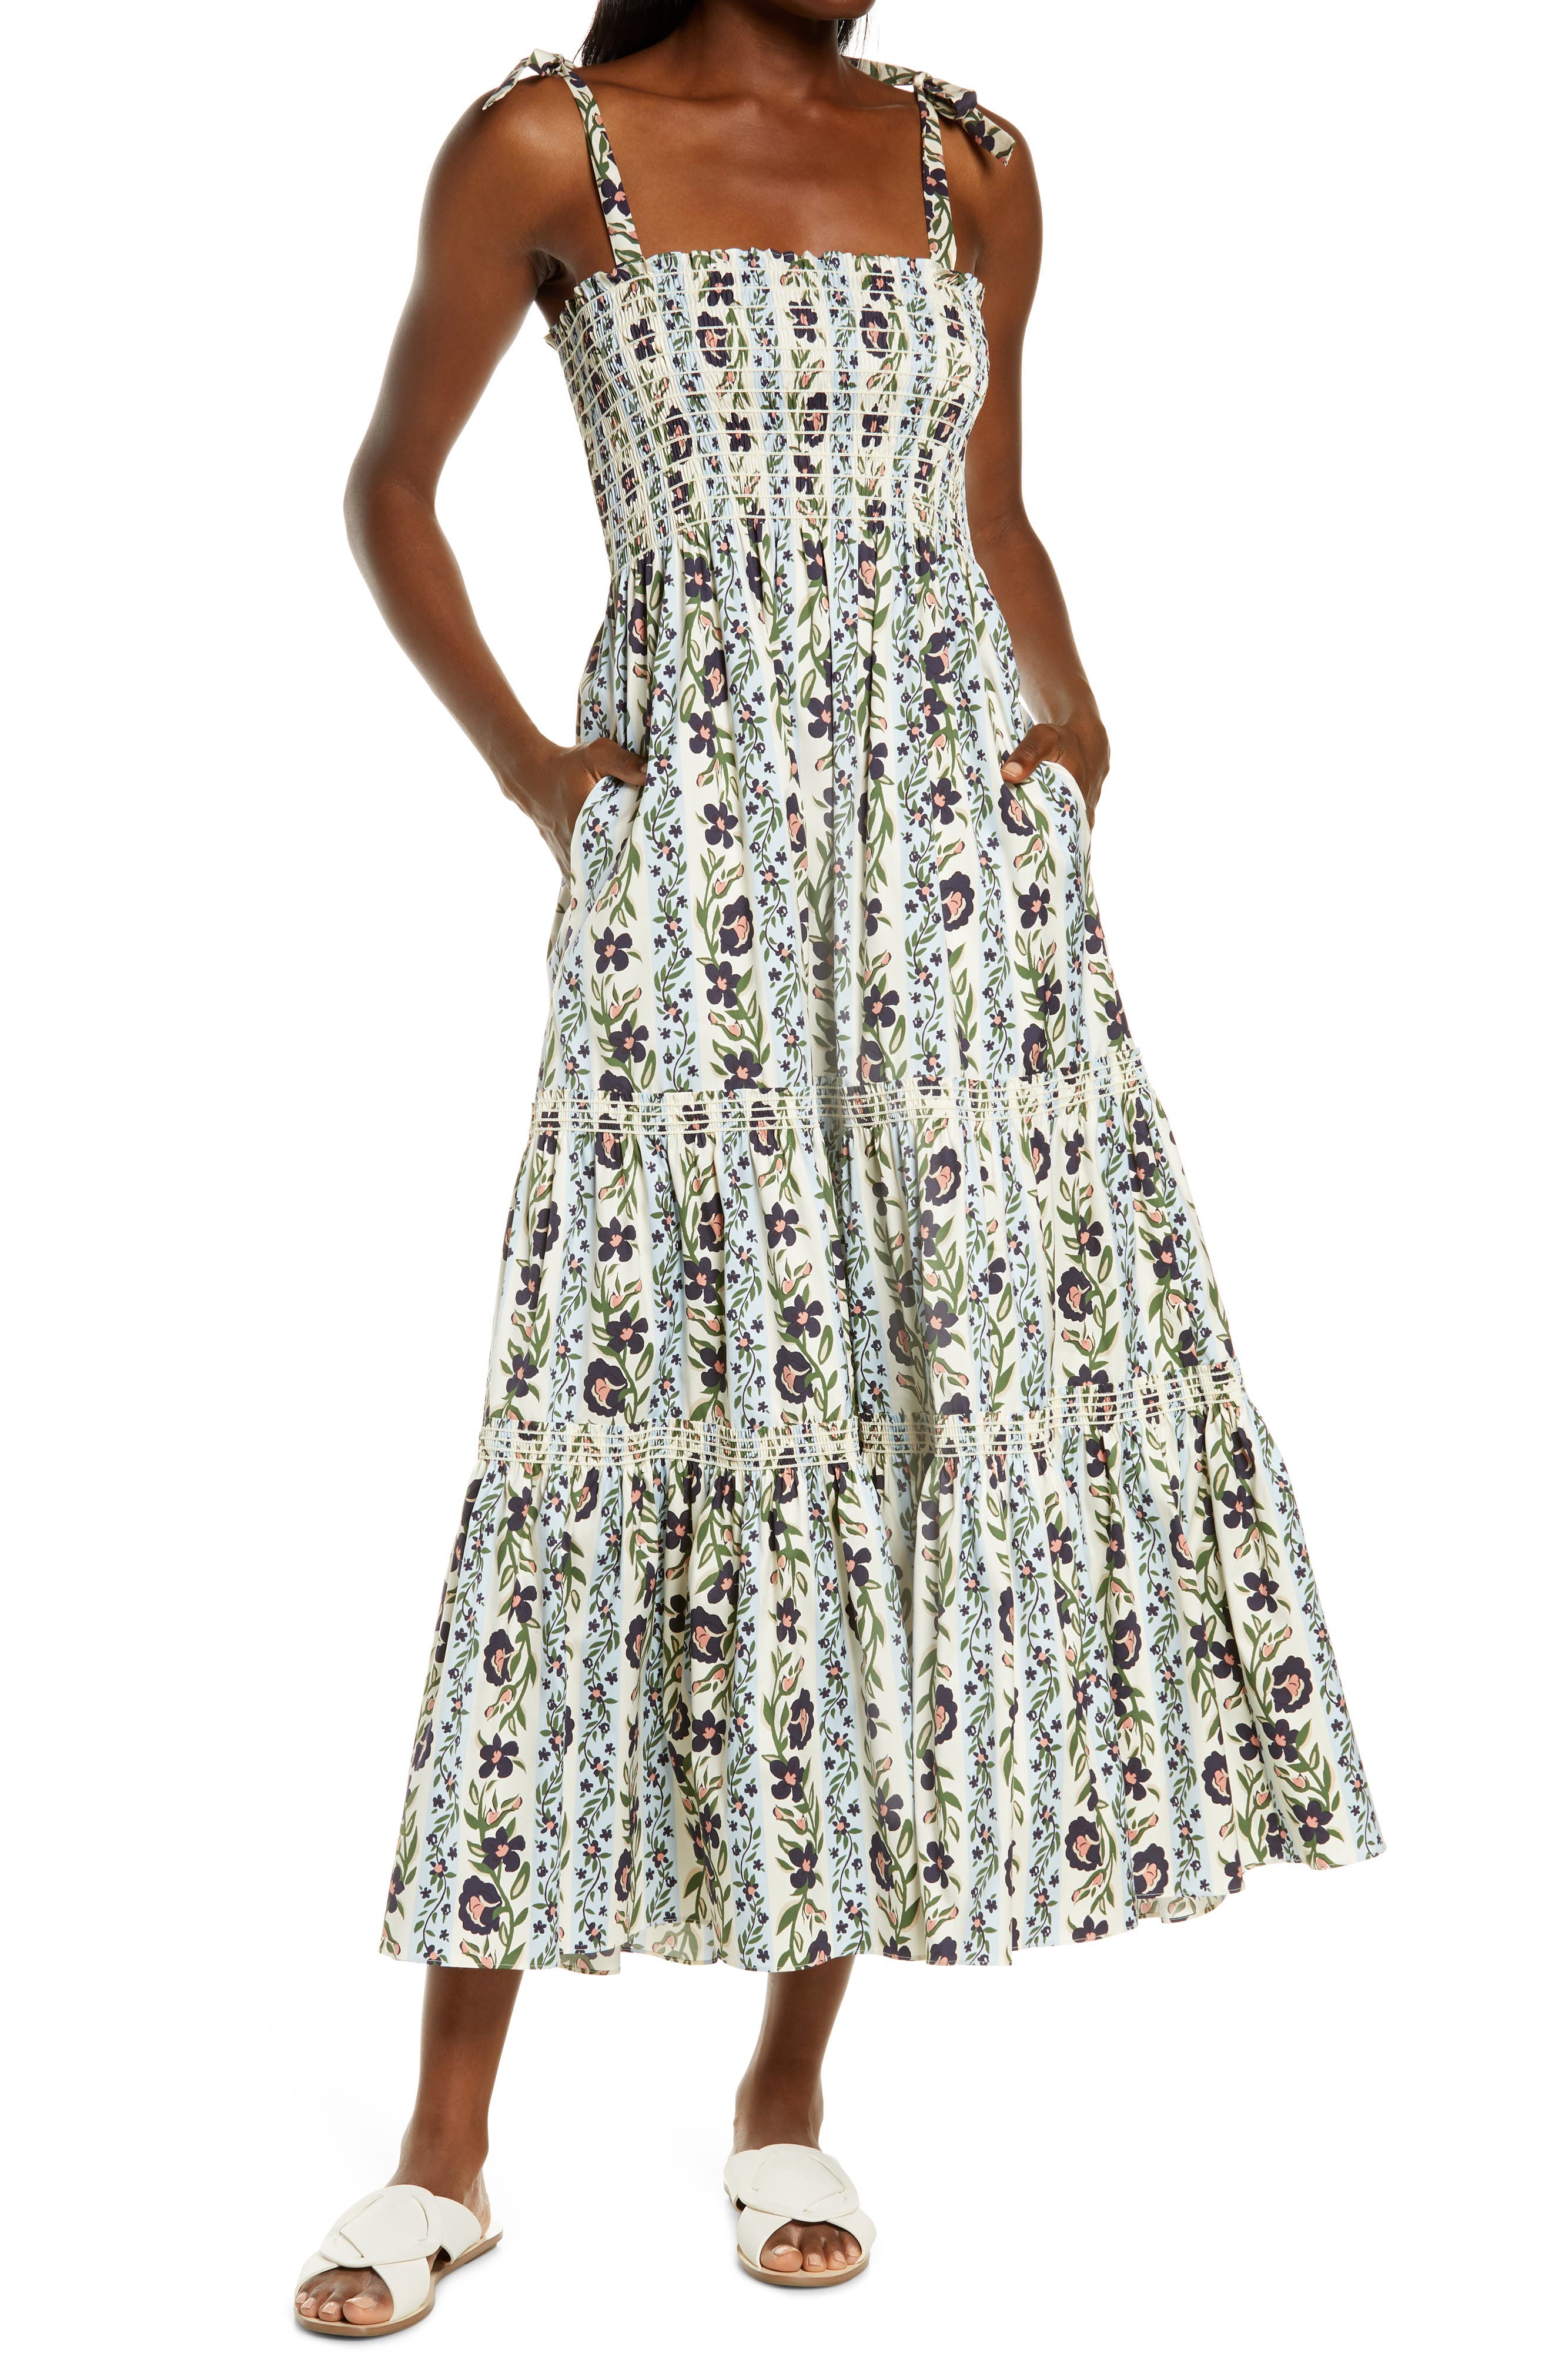 Tory Burch Dresses Nordstrom ., SAVE 34% 